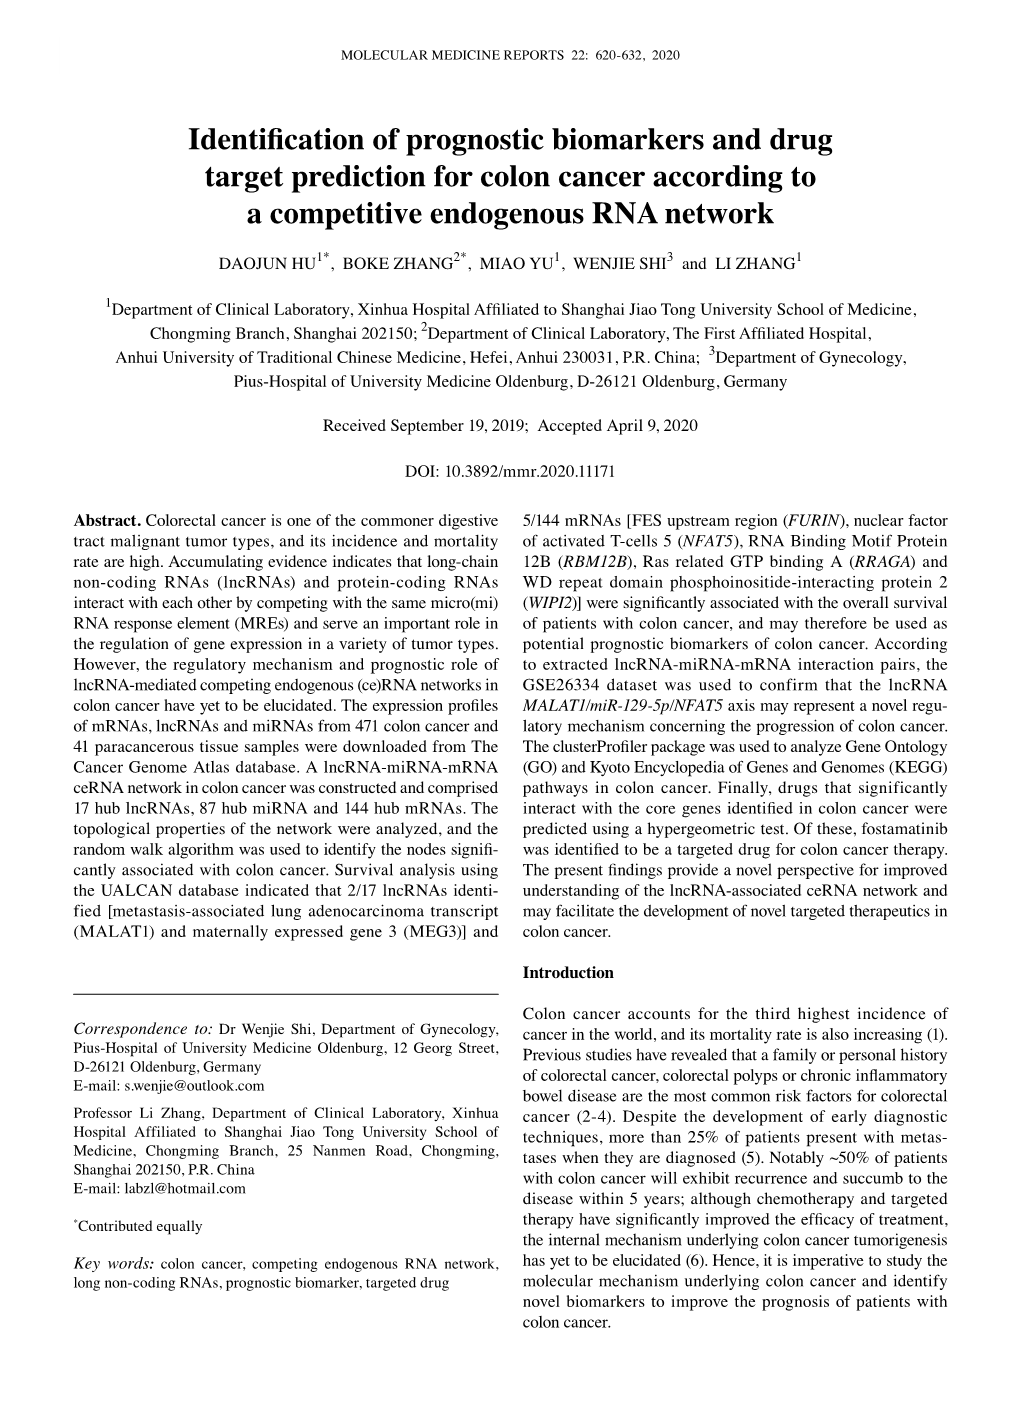 Identification of Prognostic Biomarkers and Drug Target Prediction for Colon Cancer According to a Competitive Endogenous RNA Network